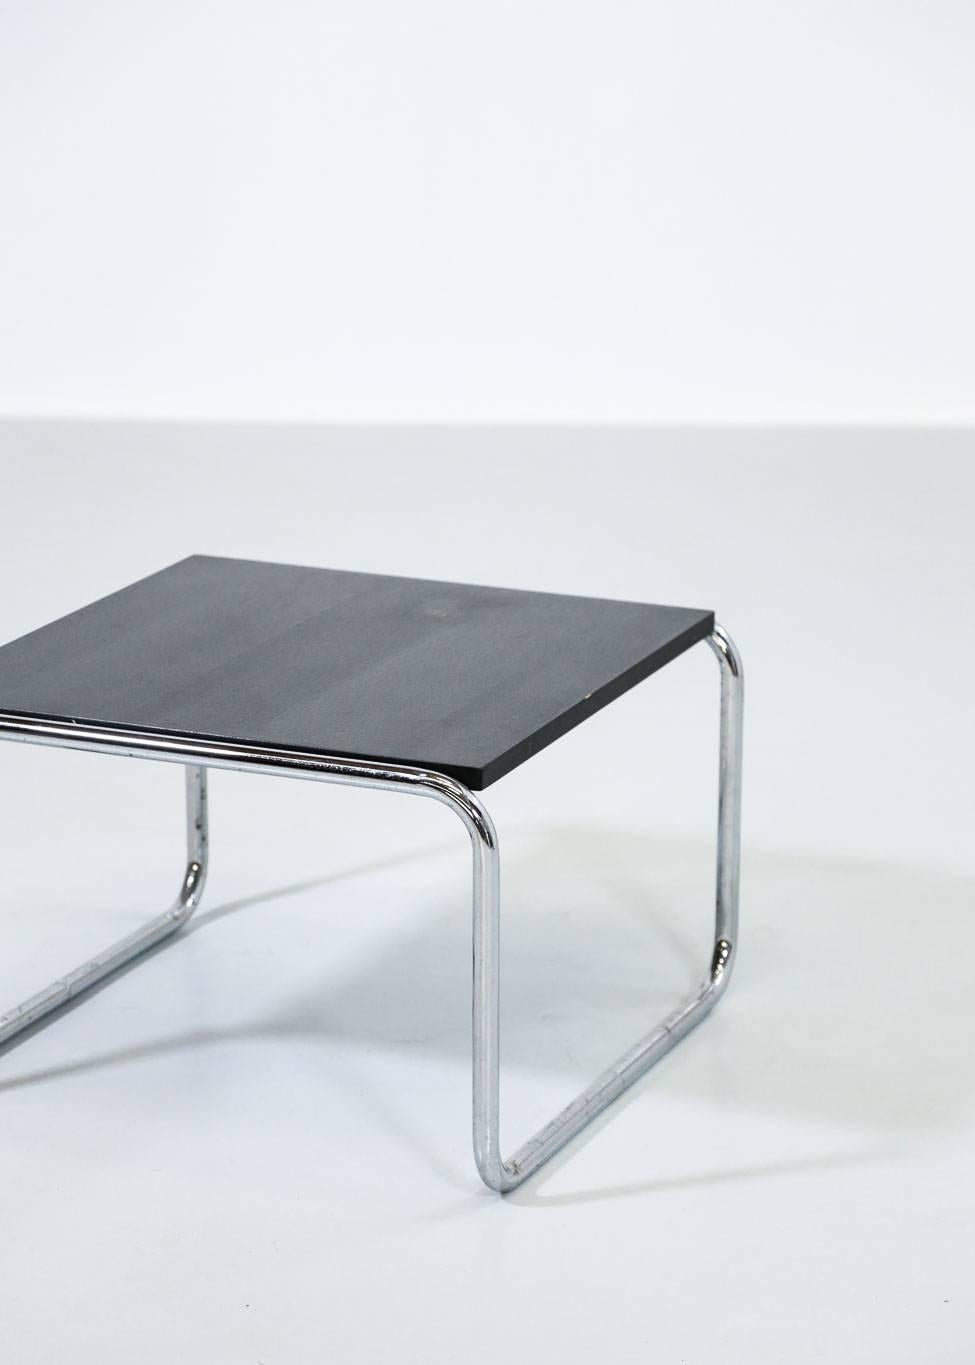 Coffee/Side Table in the Style of Marcel Breuer Bauhaus Design, Germany In Good Condition For Sale In Lyon, FR